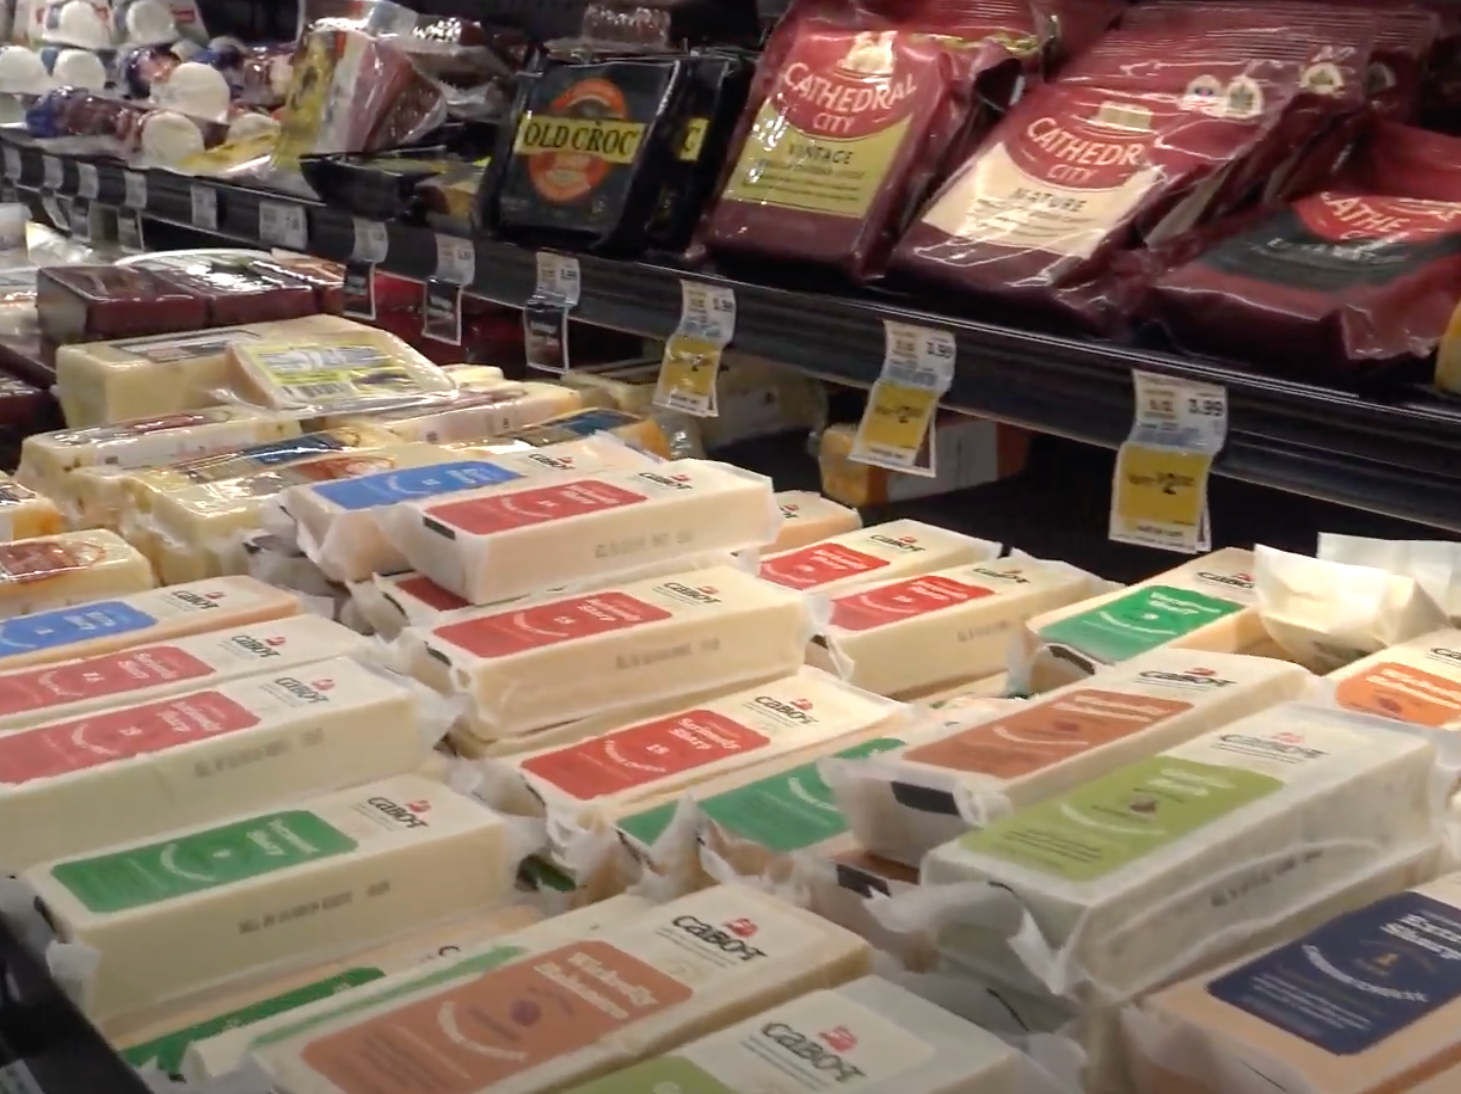 Kevin tours the ShopRite cheese department